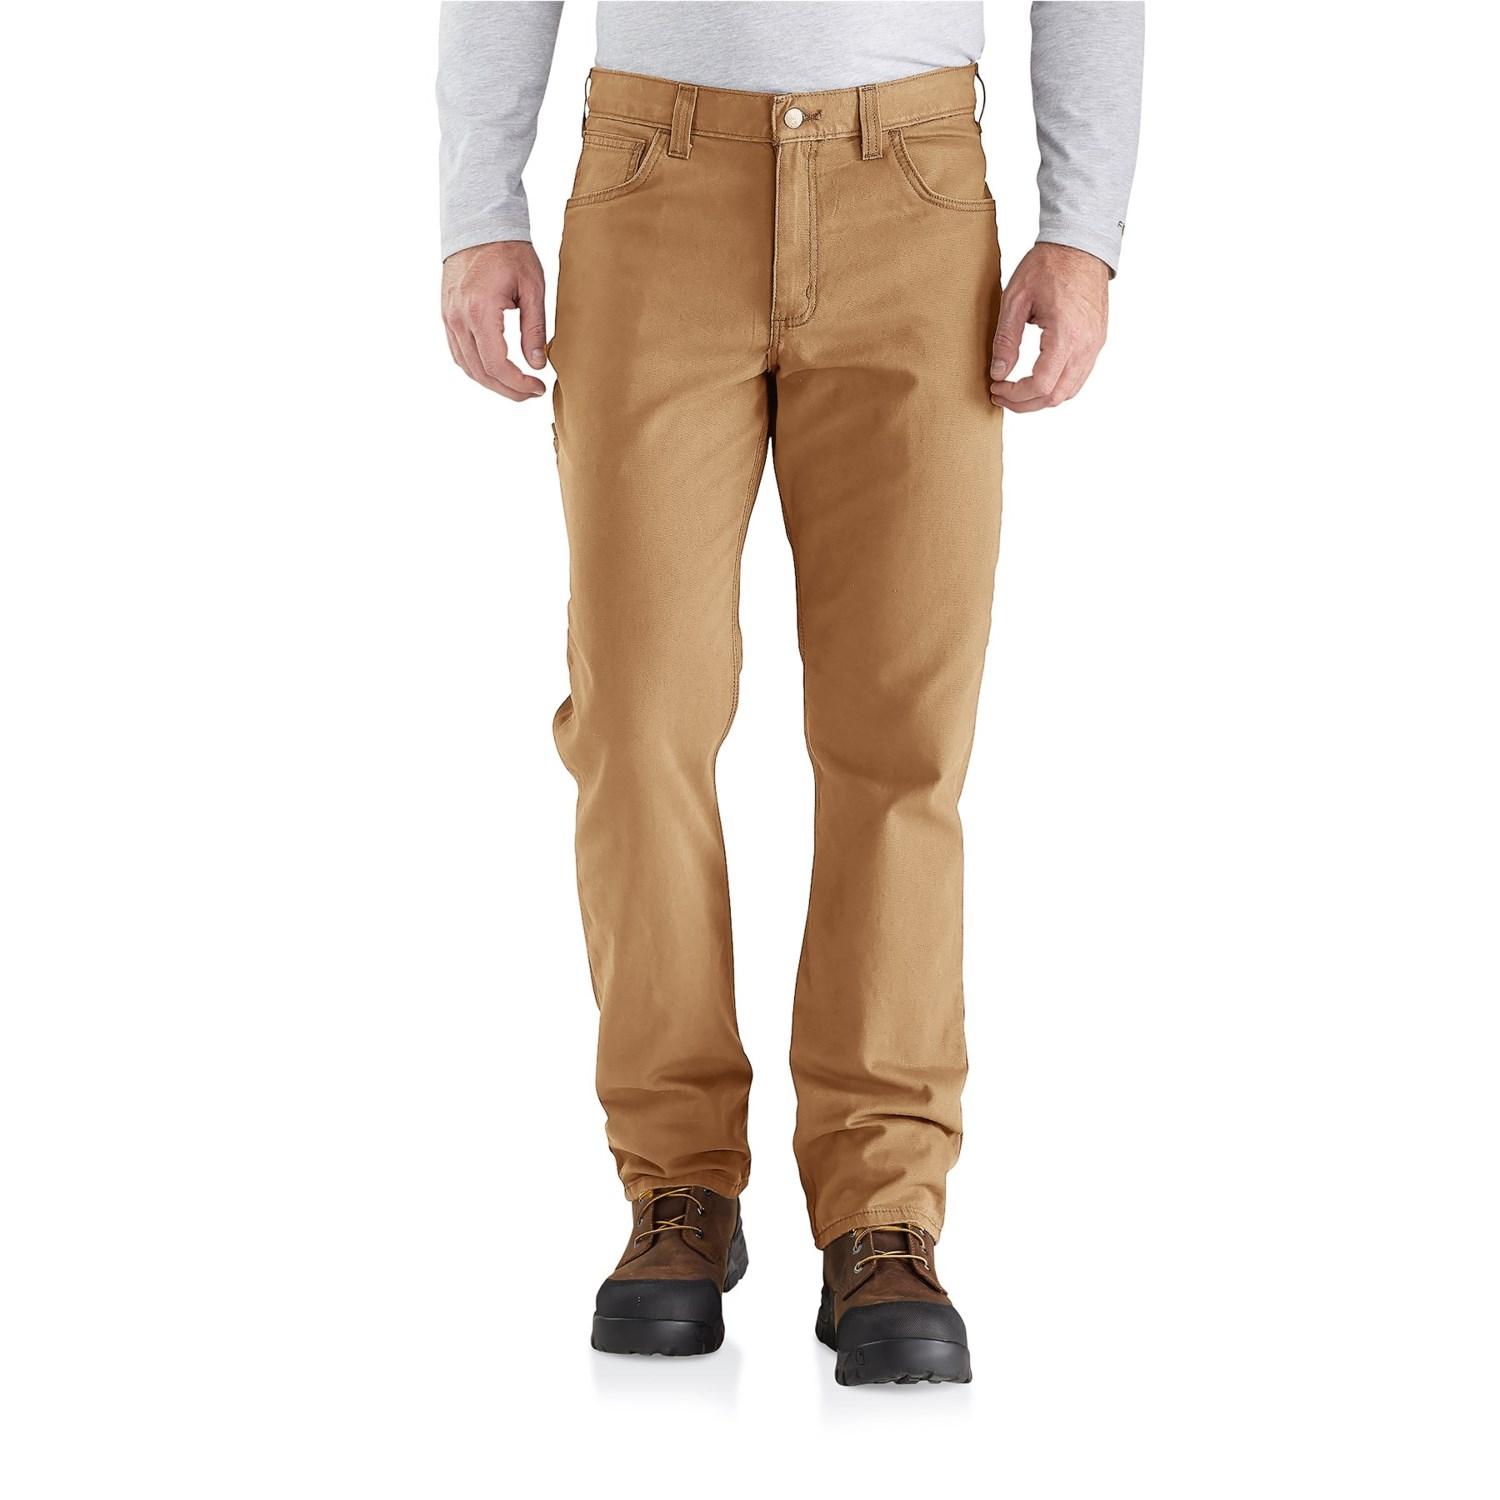 Carhartt Canvas 102517 Rigby Rugged Flex(r) Work Pants in Natural for ...